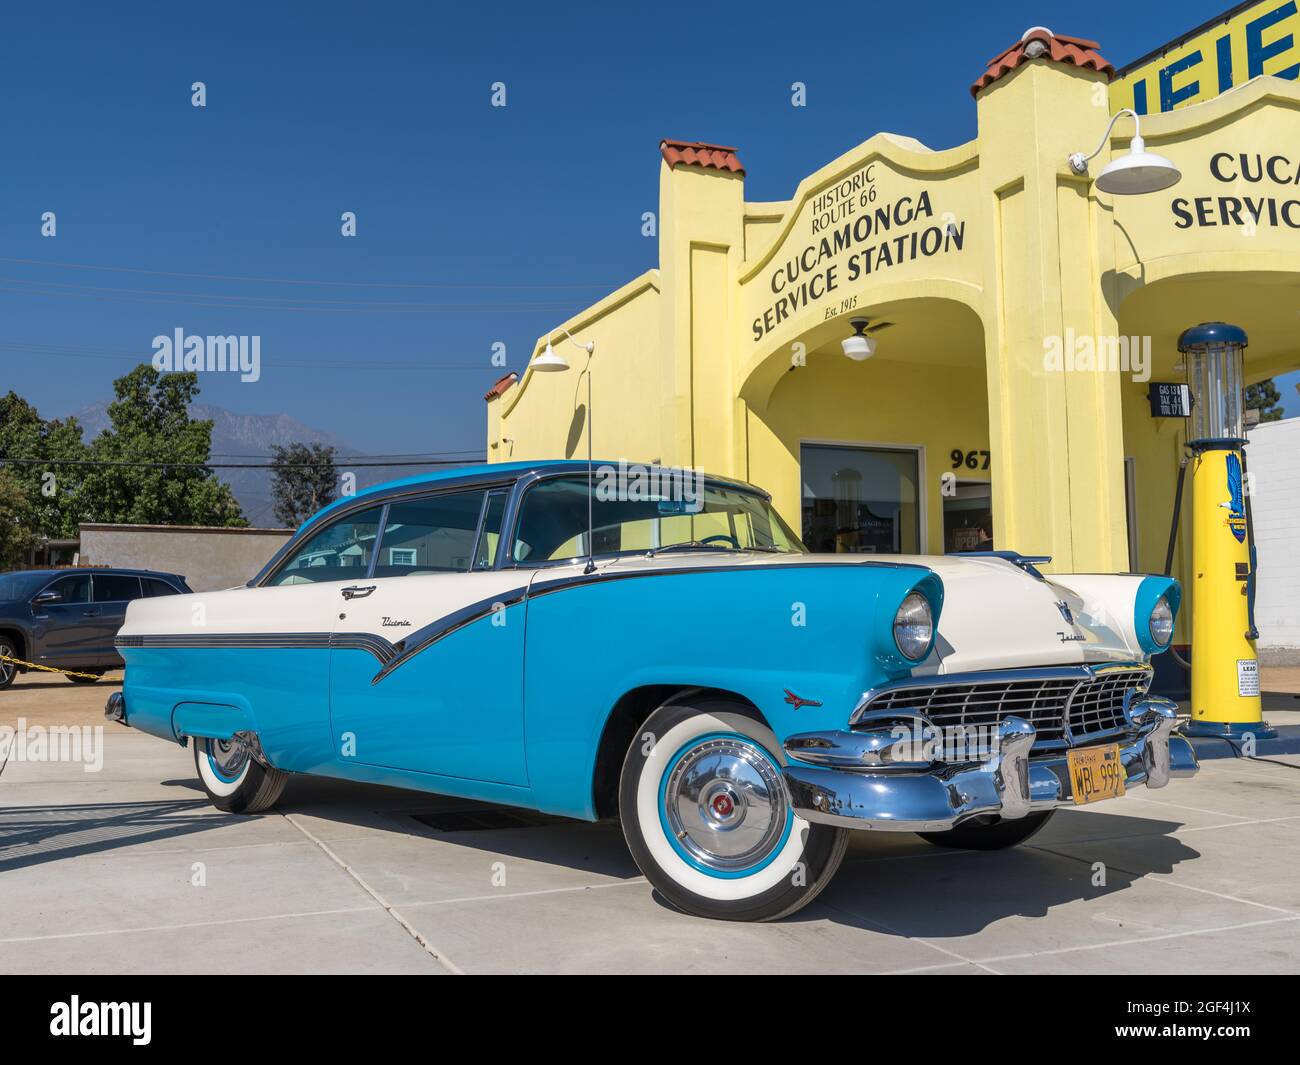 Rancho Cucamonga, USA - Oct 1, 2017: Classic 1956 Ford 2-Door Fairlane Victoria in Bermuda Blue and Colonial White on exhibit at Cucamonga Service Sta Stock Photo